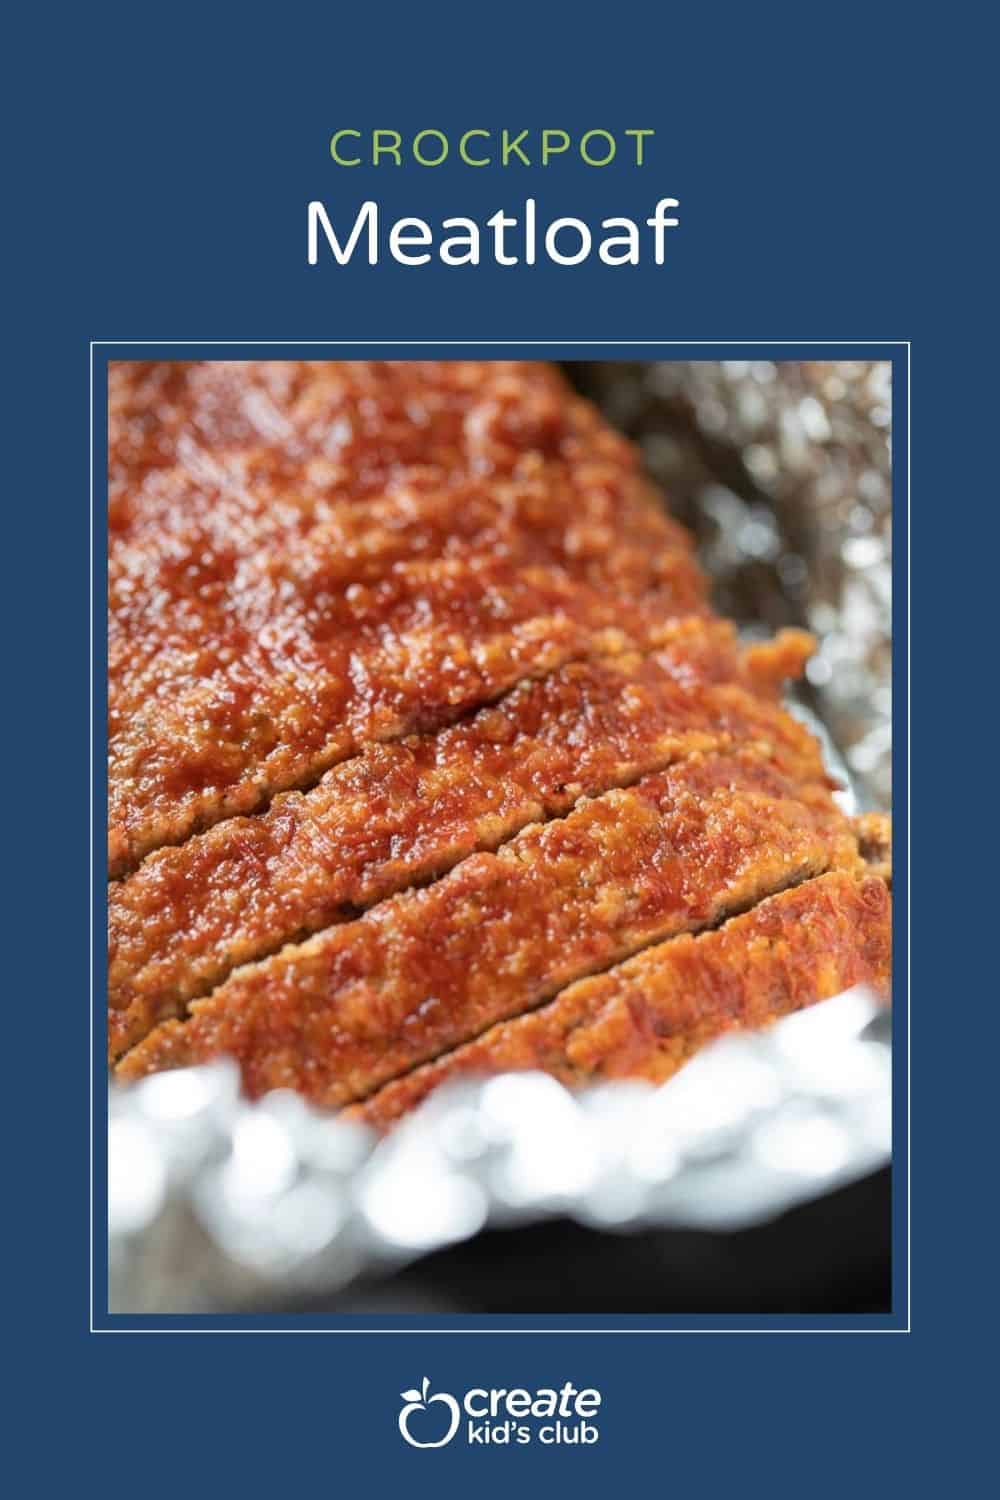 A pin of sliced meatloaf in a crockpot.